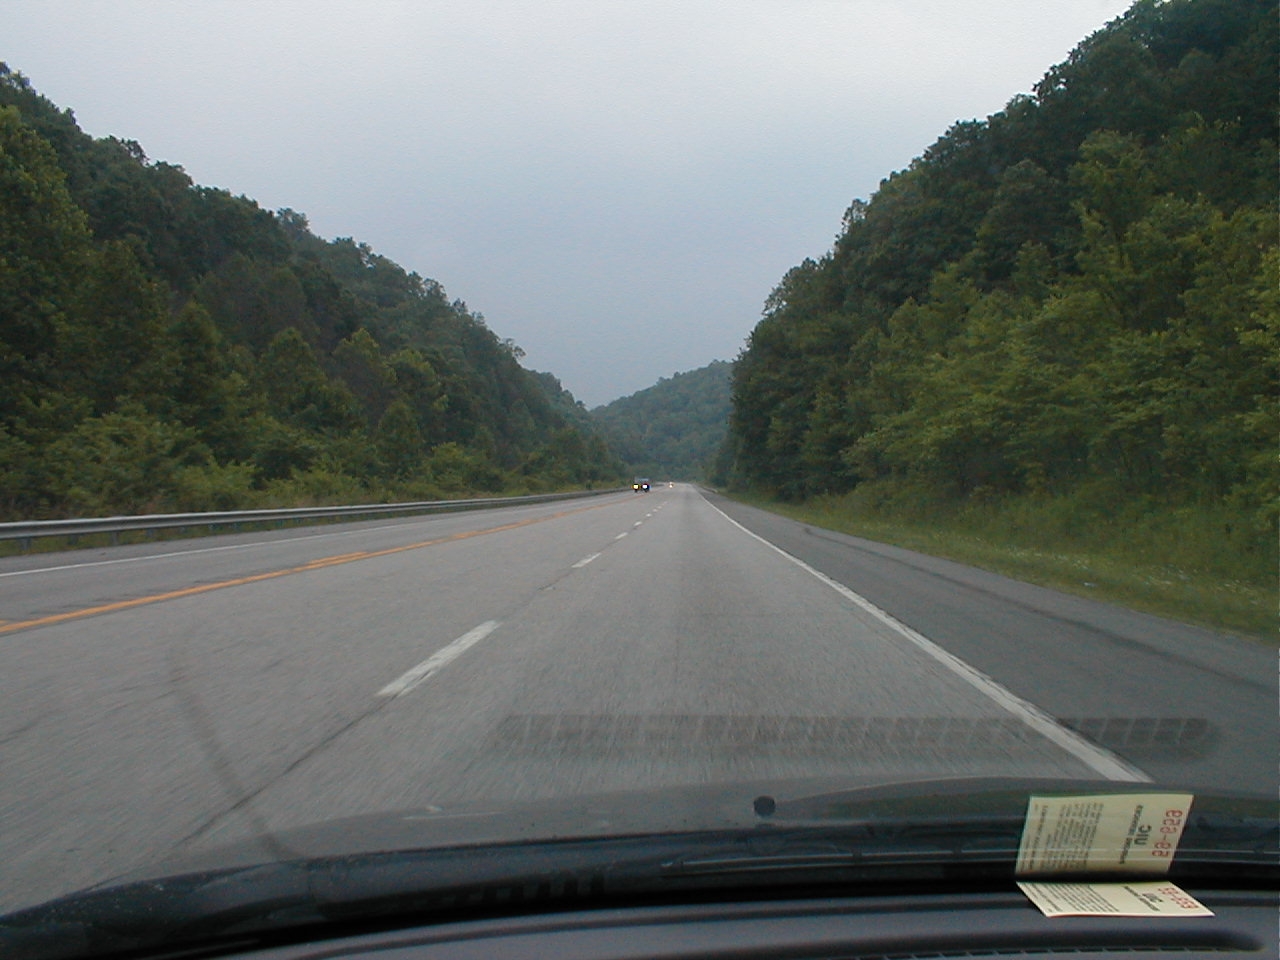 Typical section of the parkway. This section includes a passing lane.